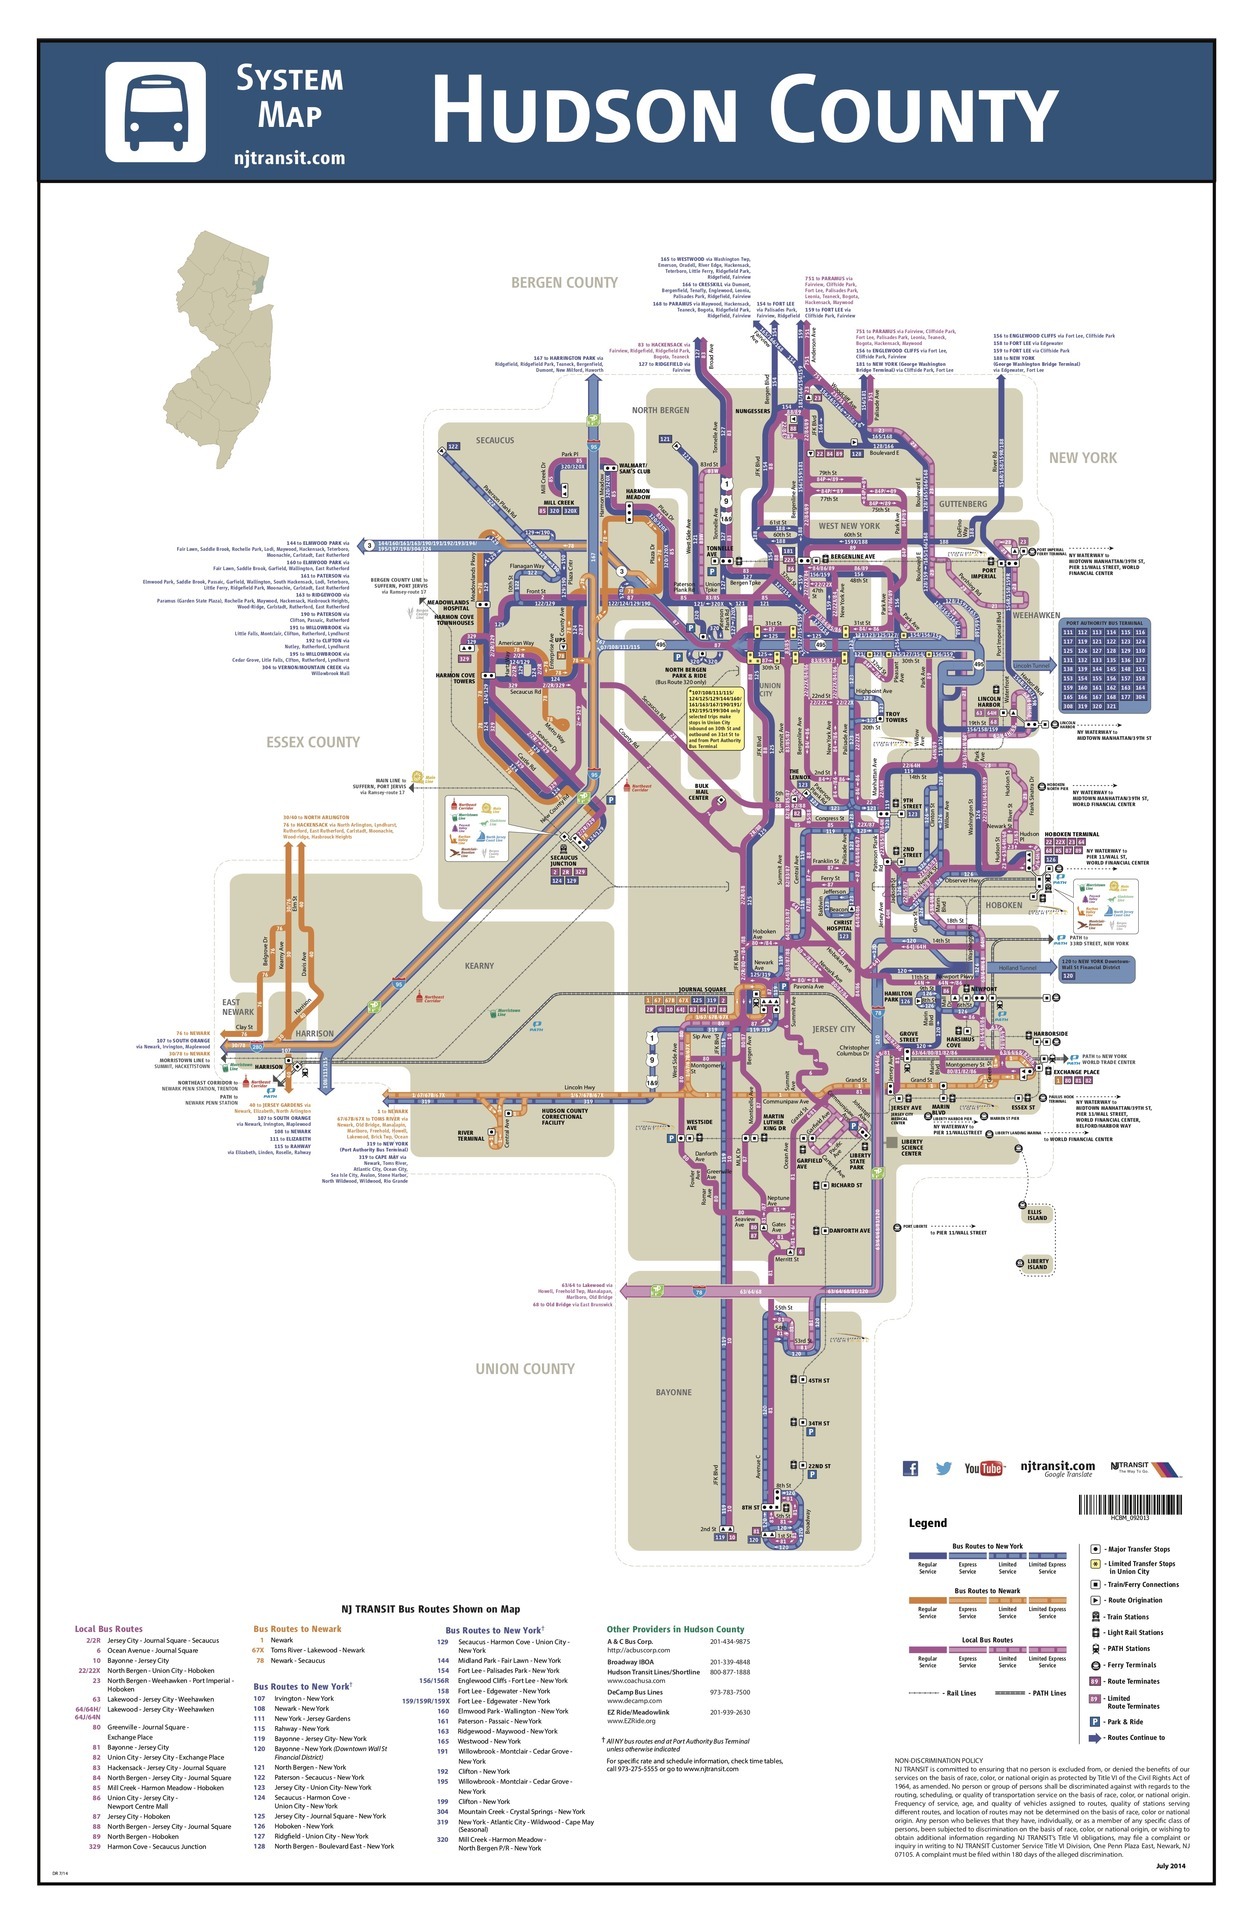 transit maps — submission – official map: map of nj transit bus